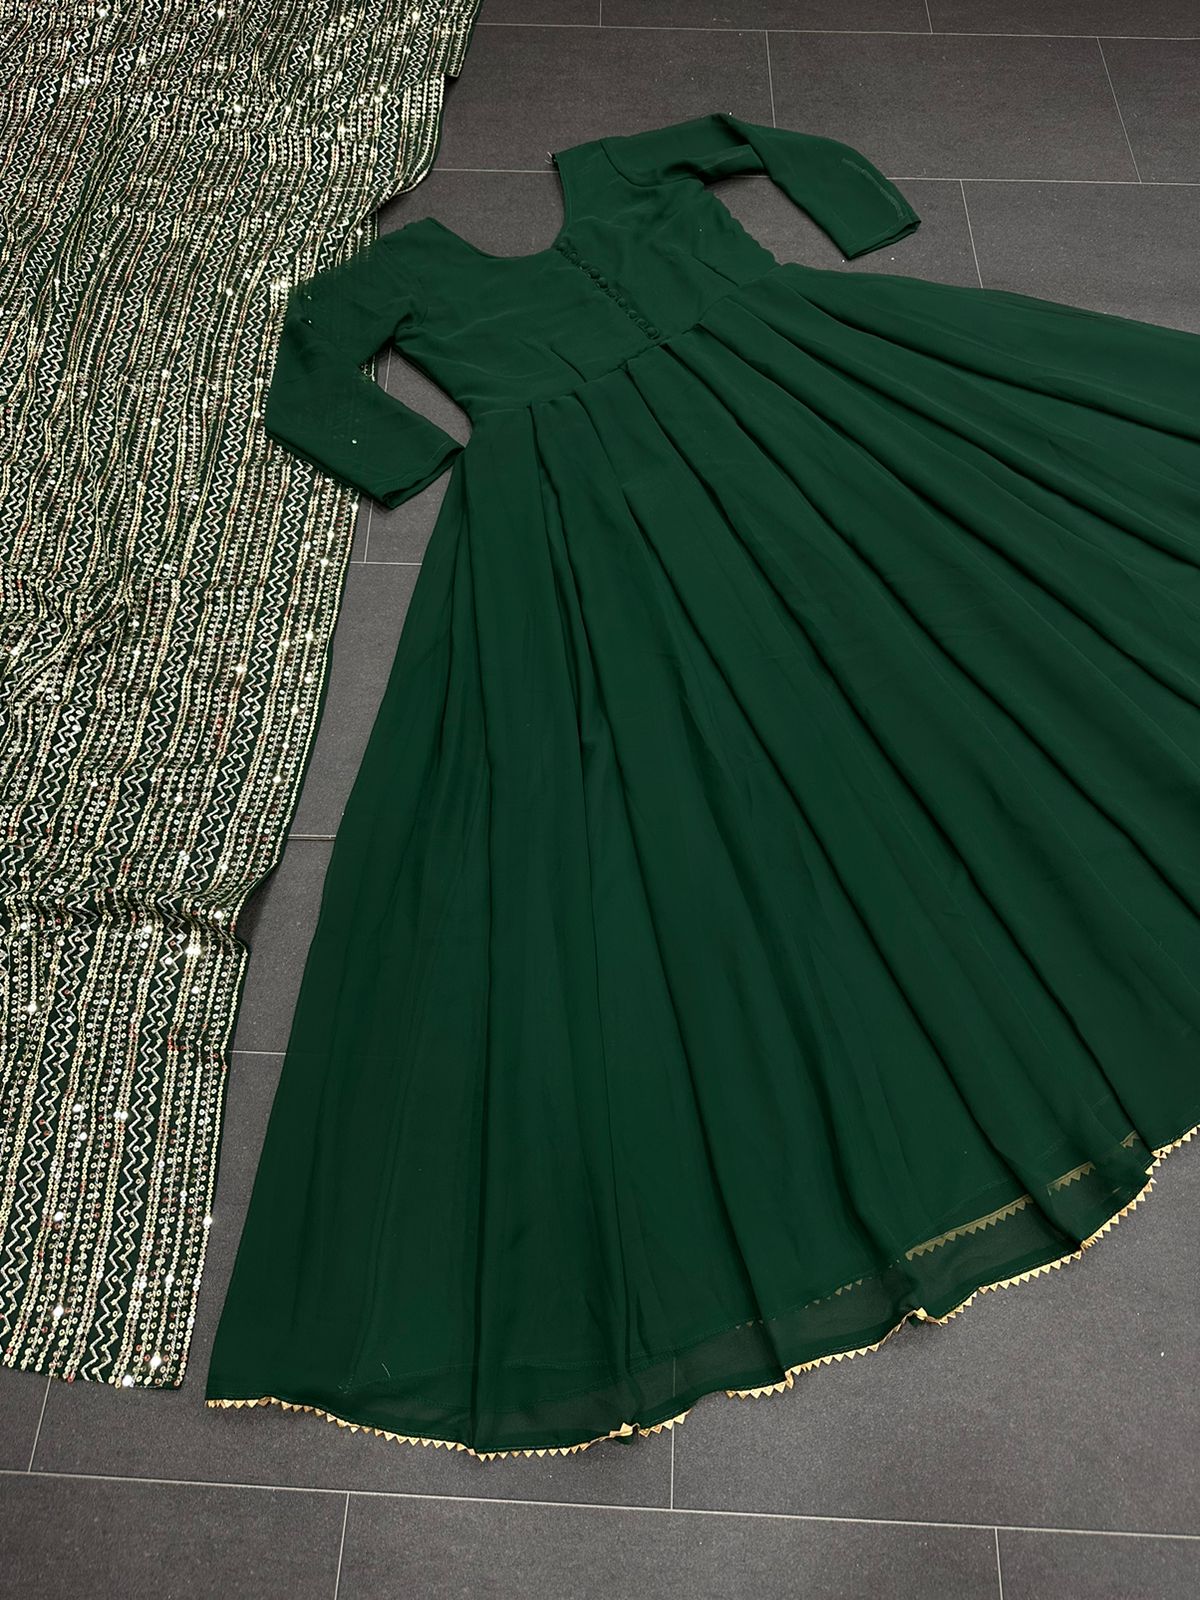 Beautiful Green Color Gown With Heavy Dupatta